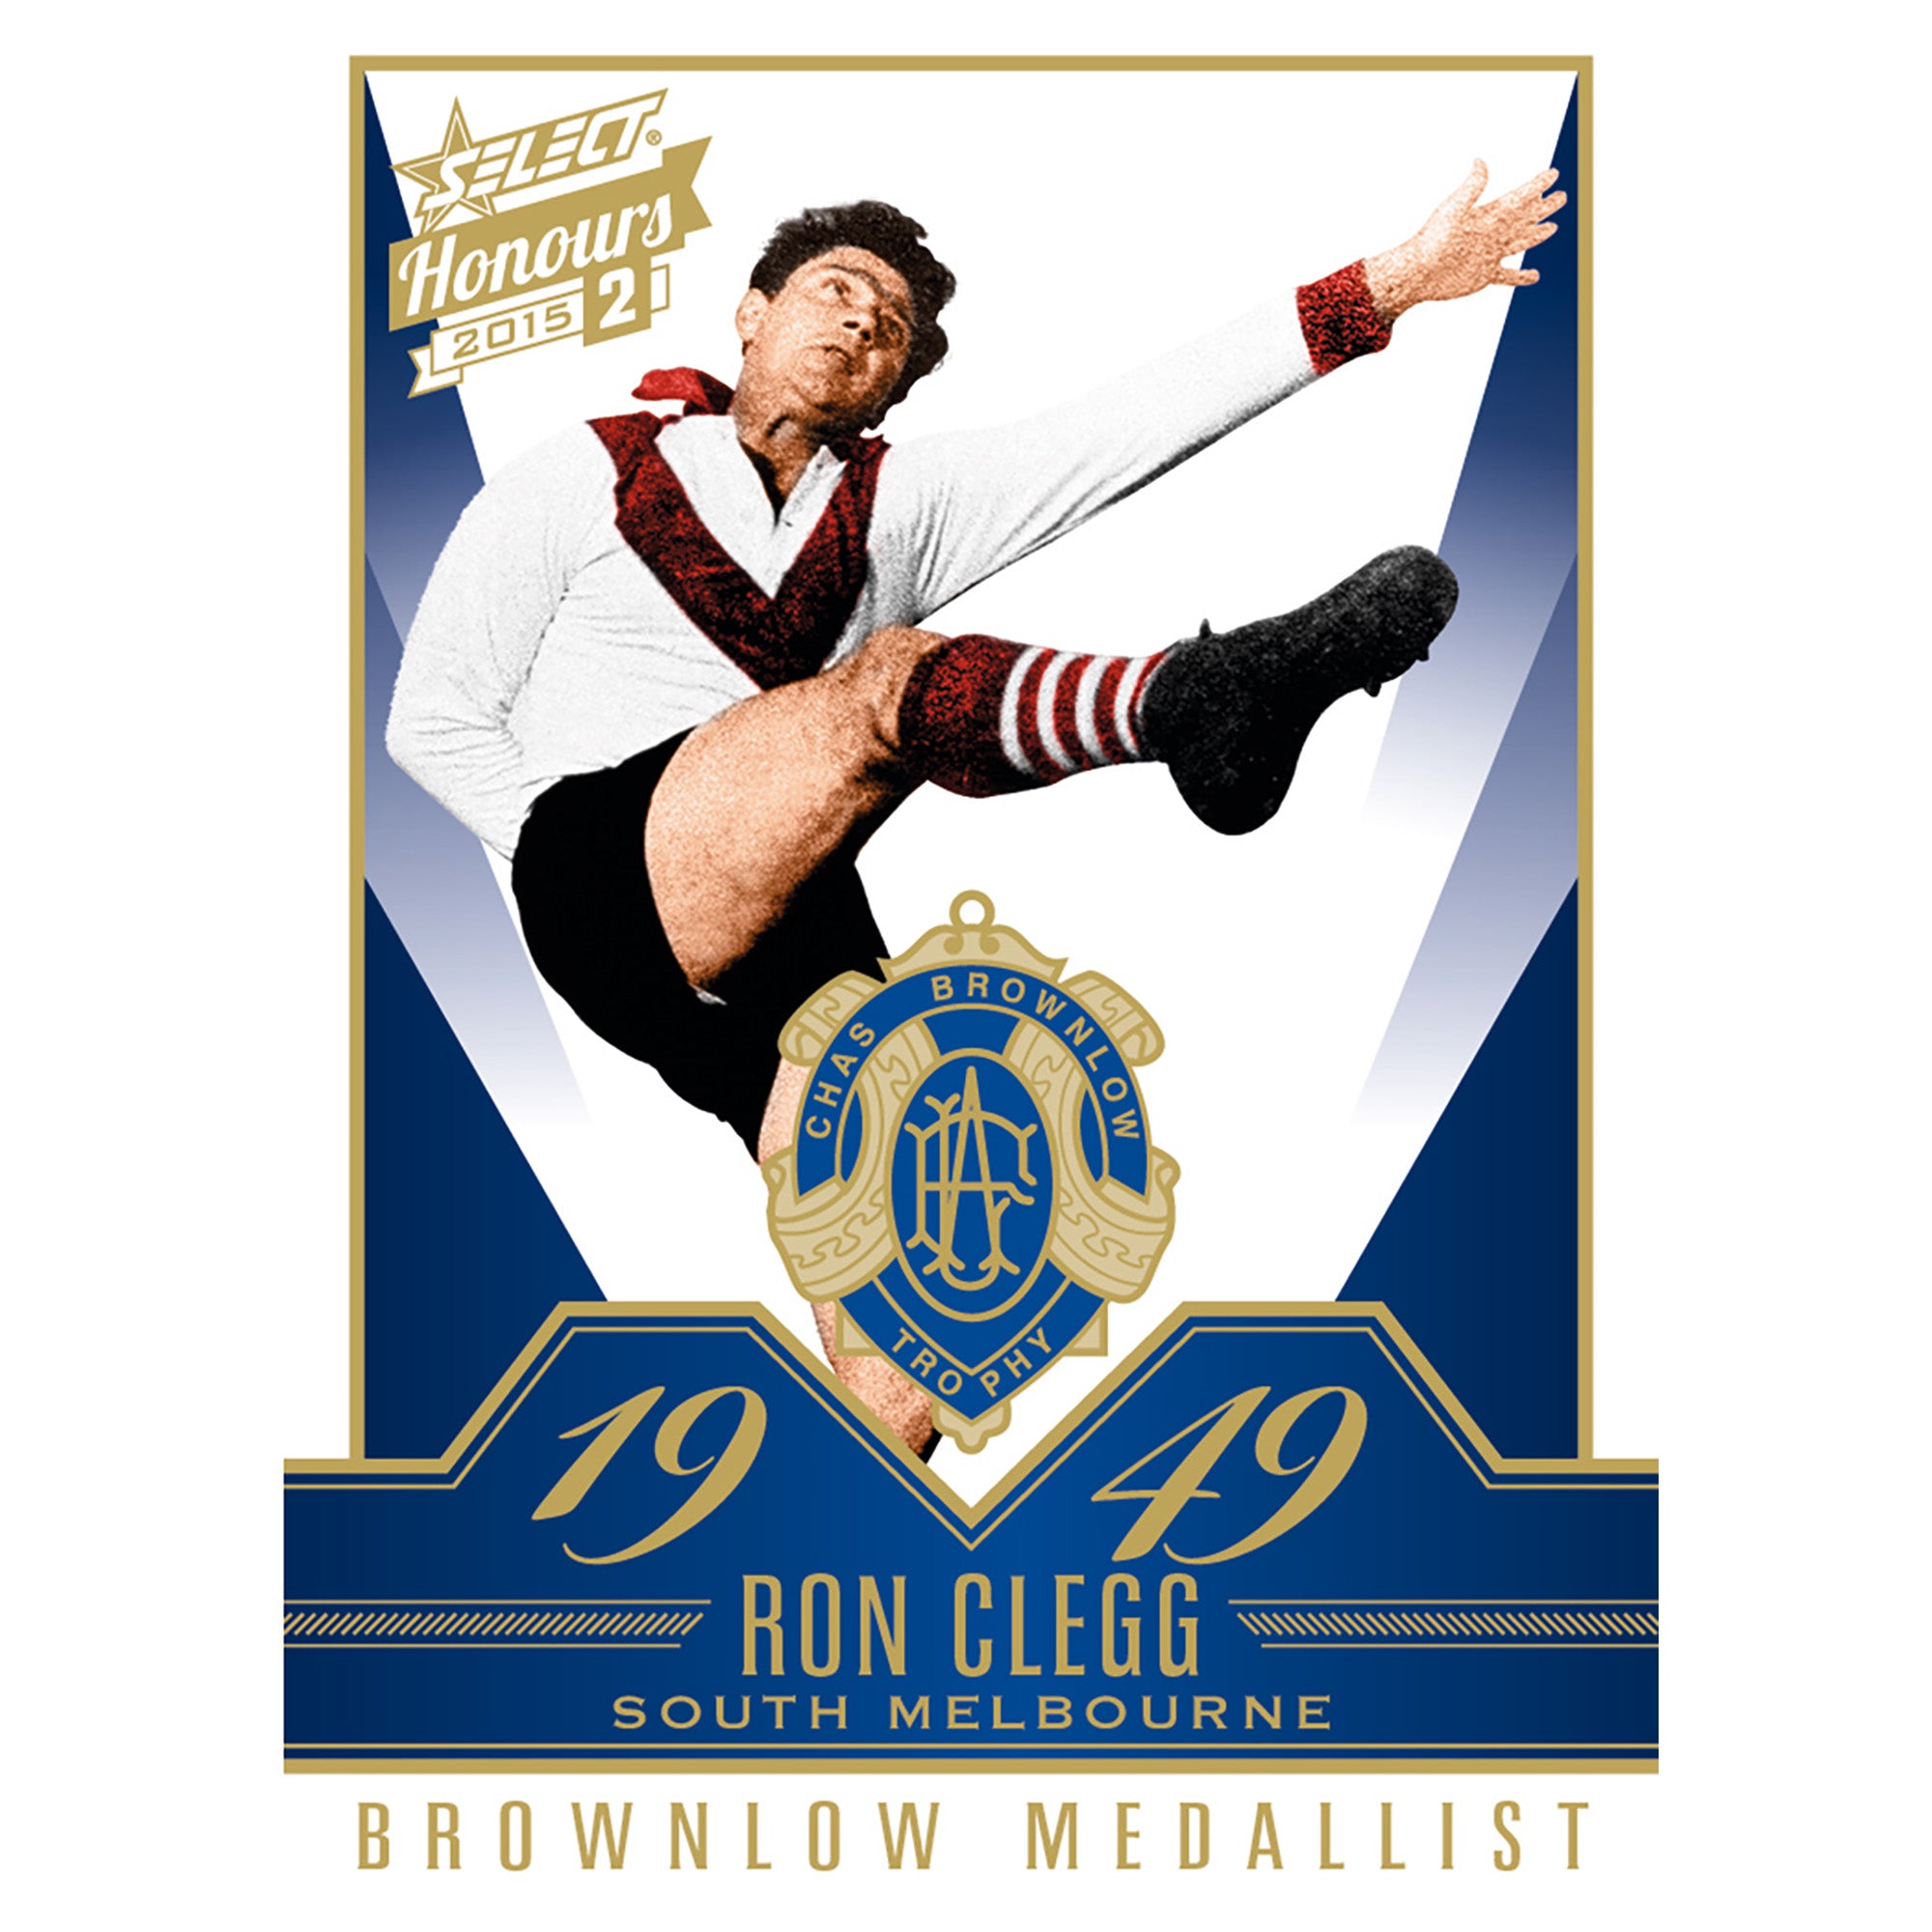 AFL Select Australia 2015 Honours 2 - Brownlow Gallery Ron Clegg South Melbourne BG67